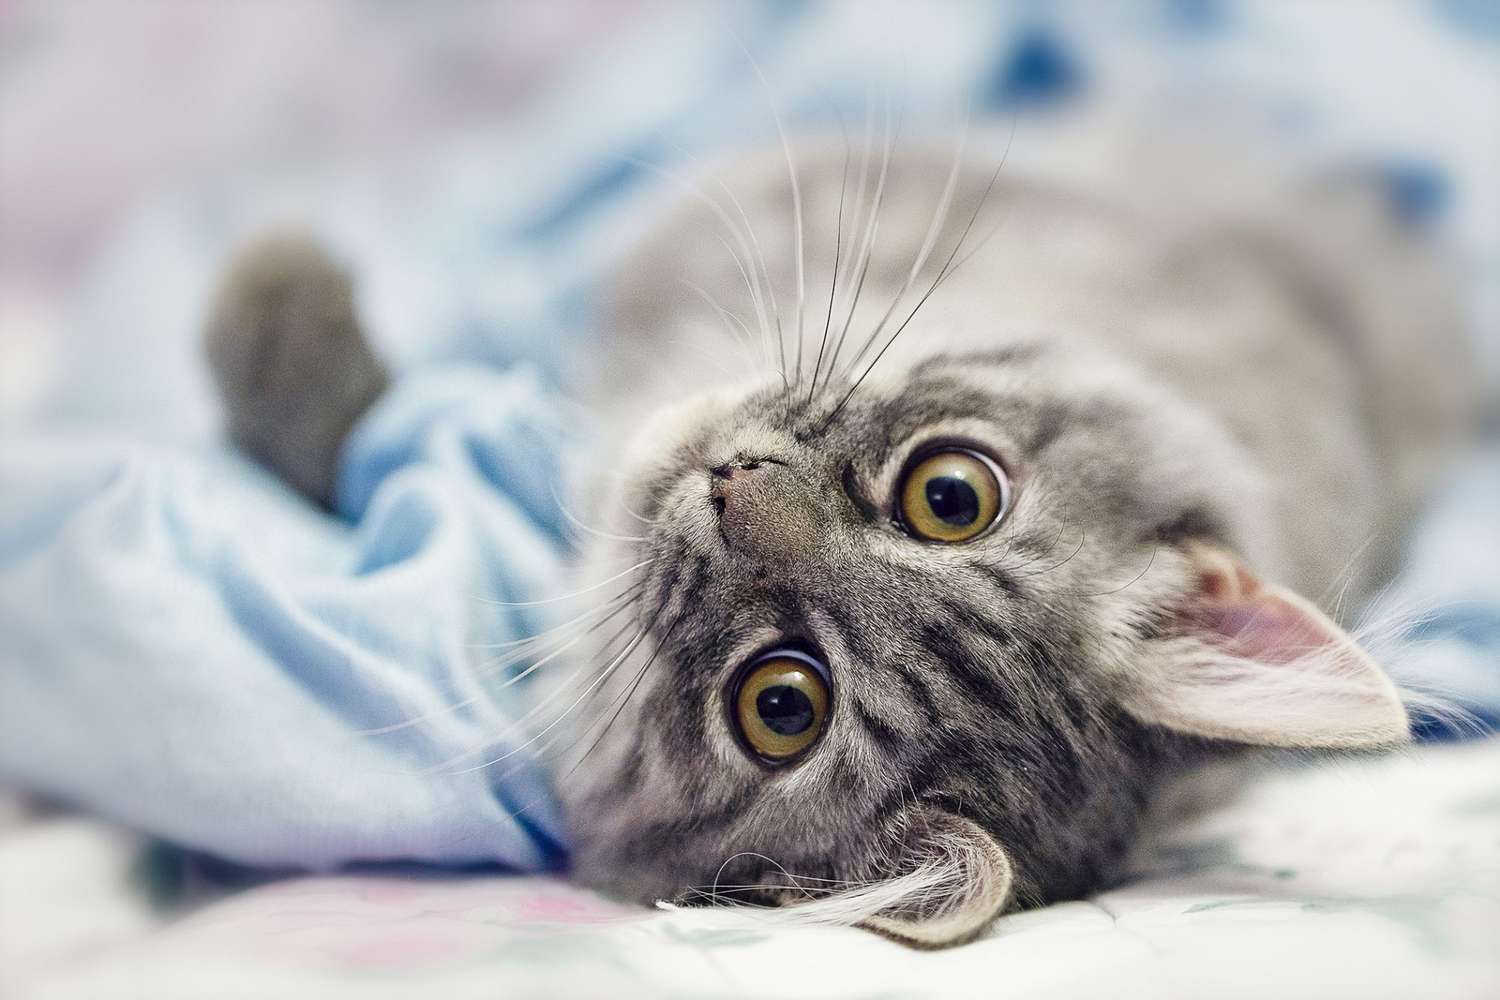 Is Your Kitten's Belly Bloated? Find Out What's Causing Your Wee One's Tummy Trouble